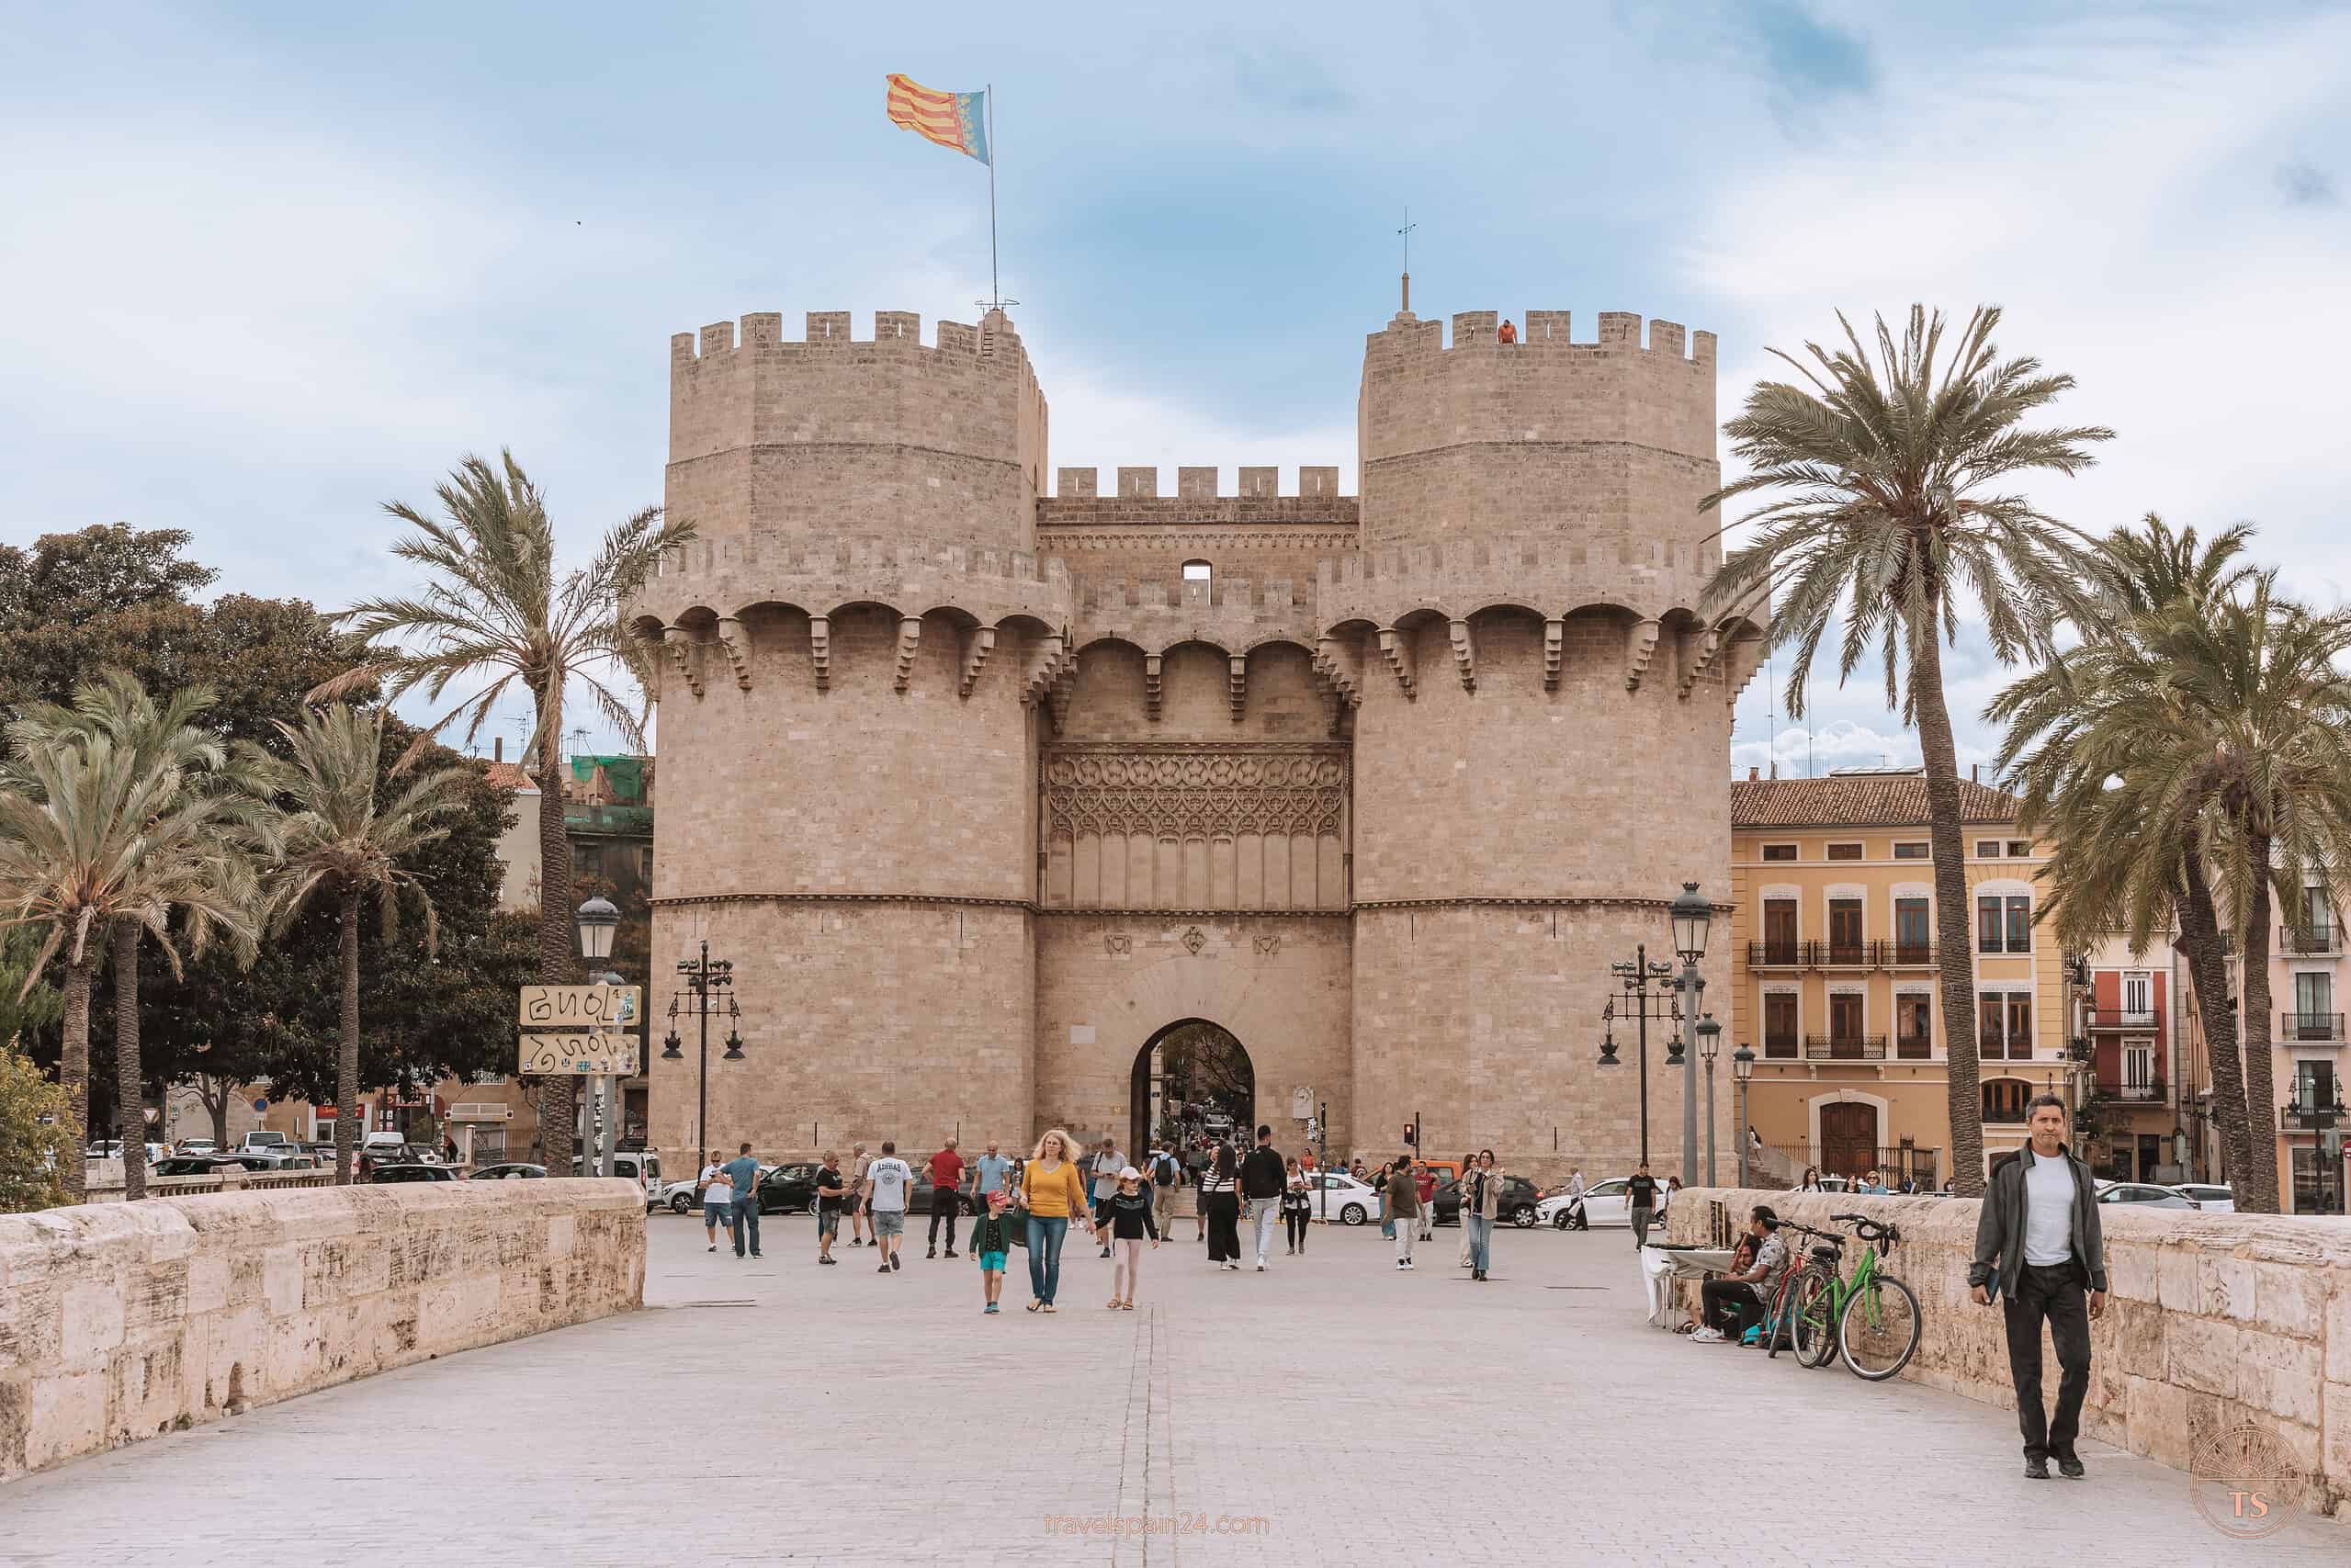 View from the bridge of the Serranos Towers in Valencia, showing many people walking through the open doors into the city center—a bustling gateway to explore this must-visit attraction.